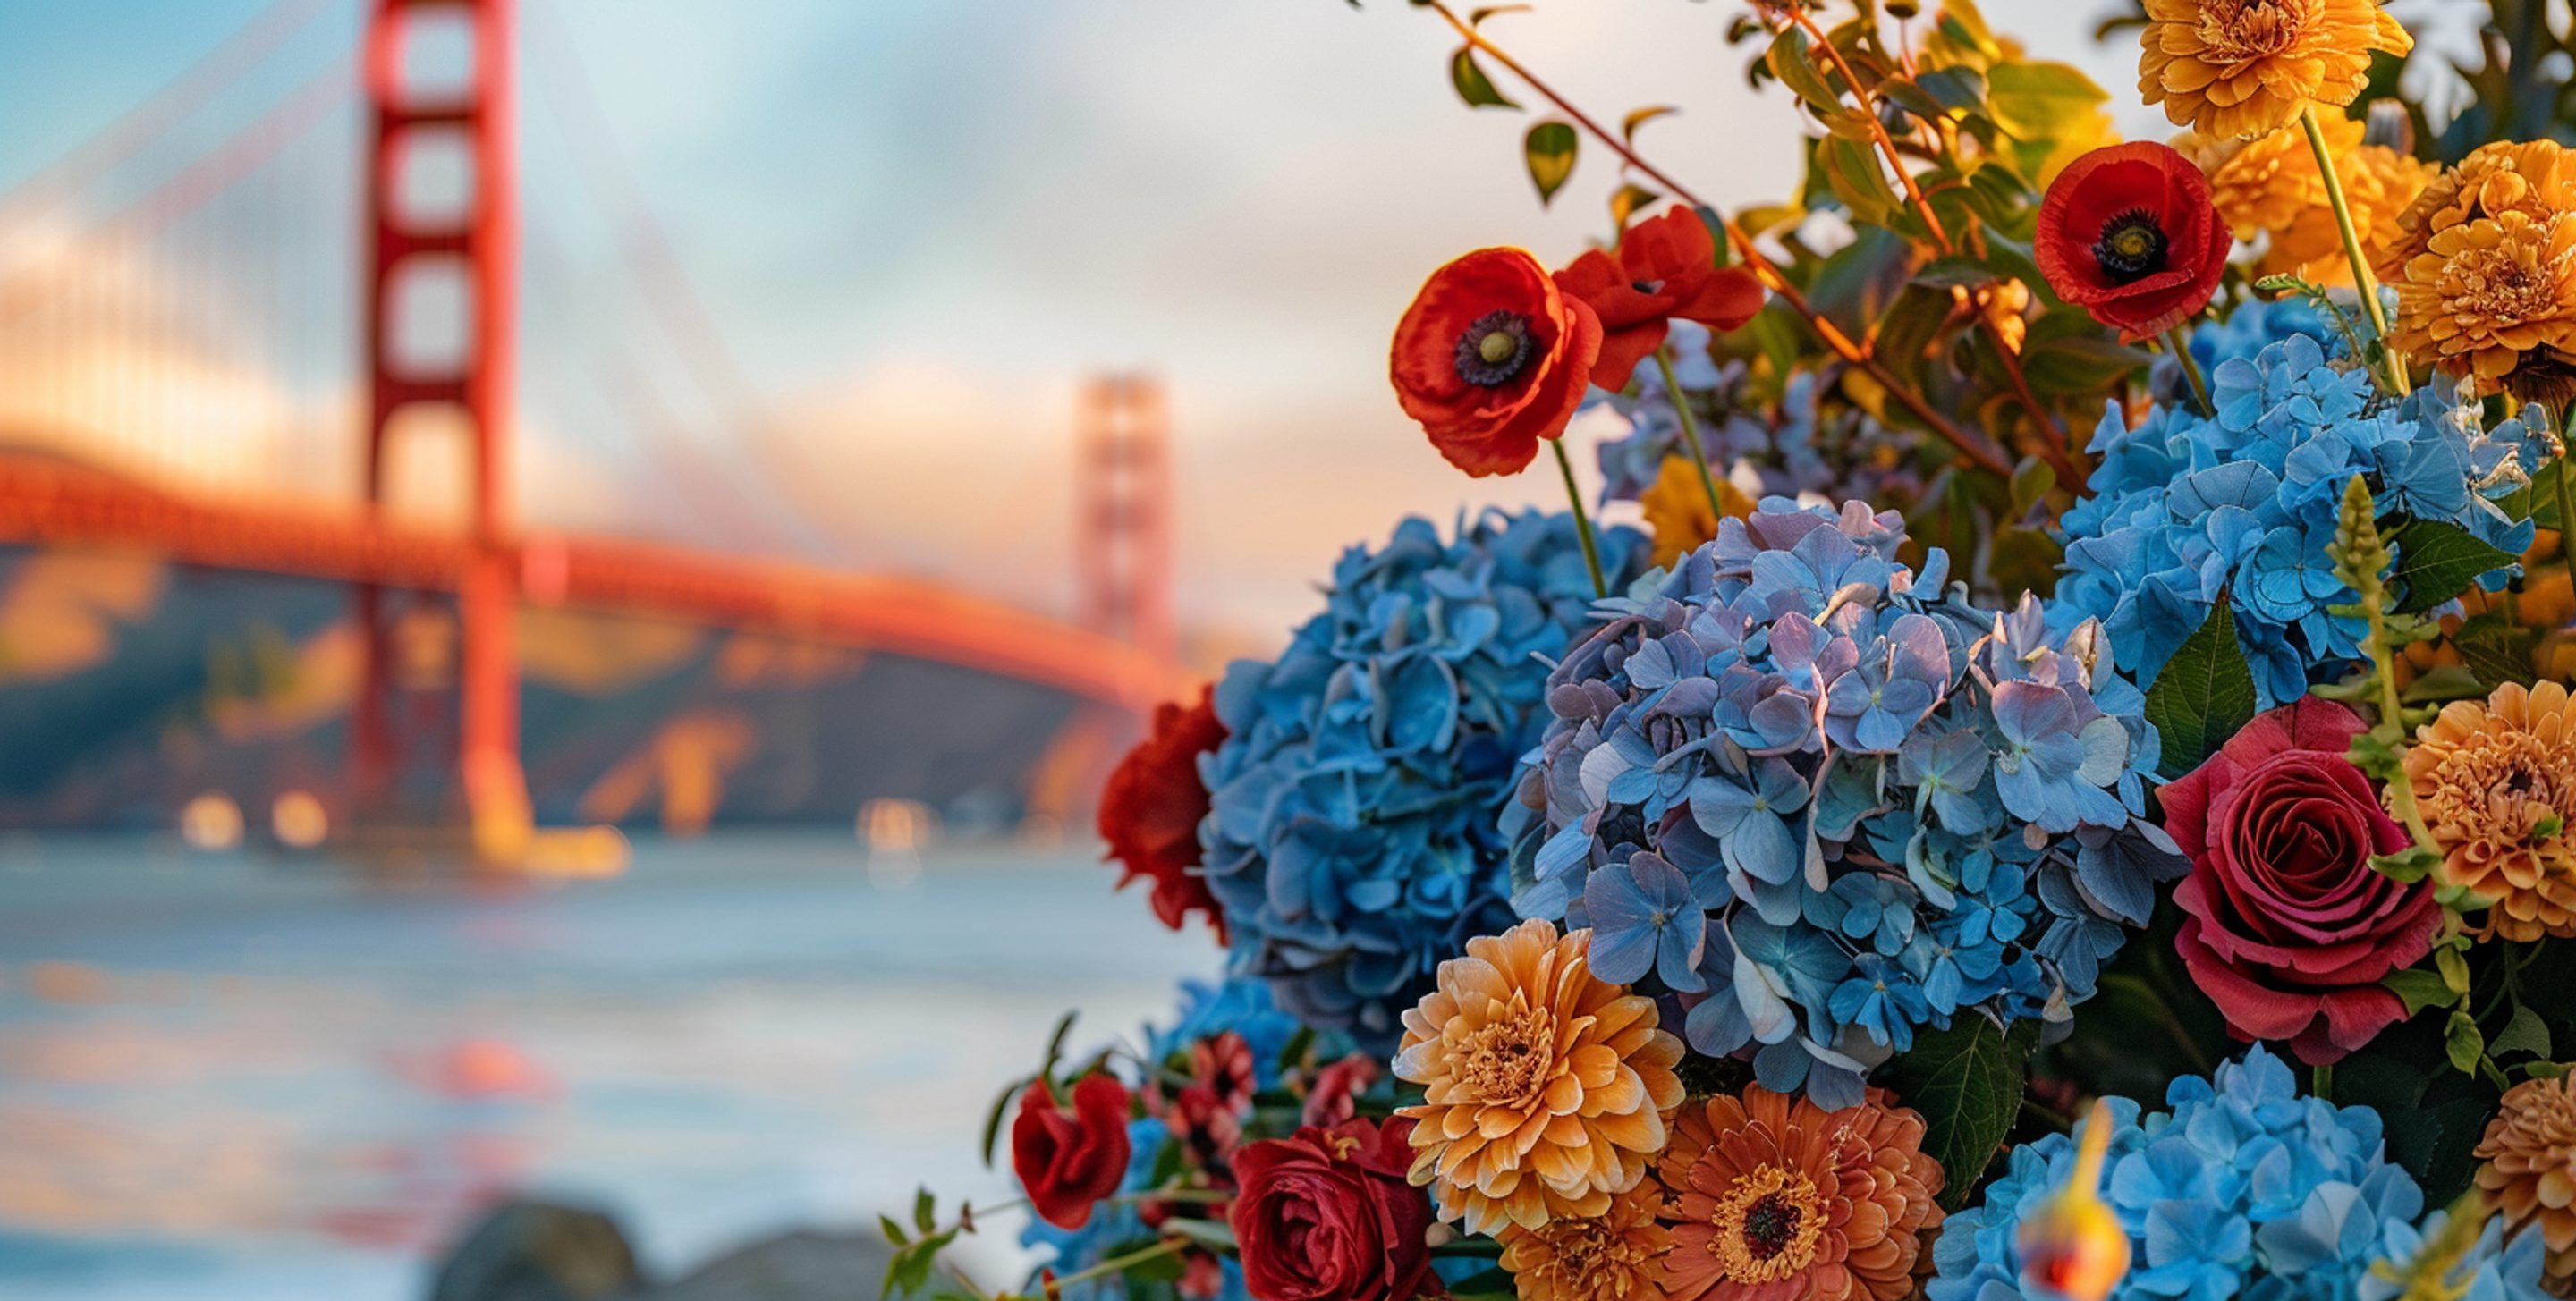 A beautiful close up up blue hydrangeas, red roses, with the golden gate bridge of San Francisco in the background, softly blurred.